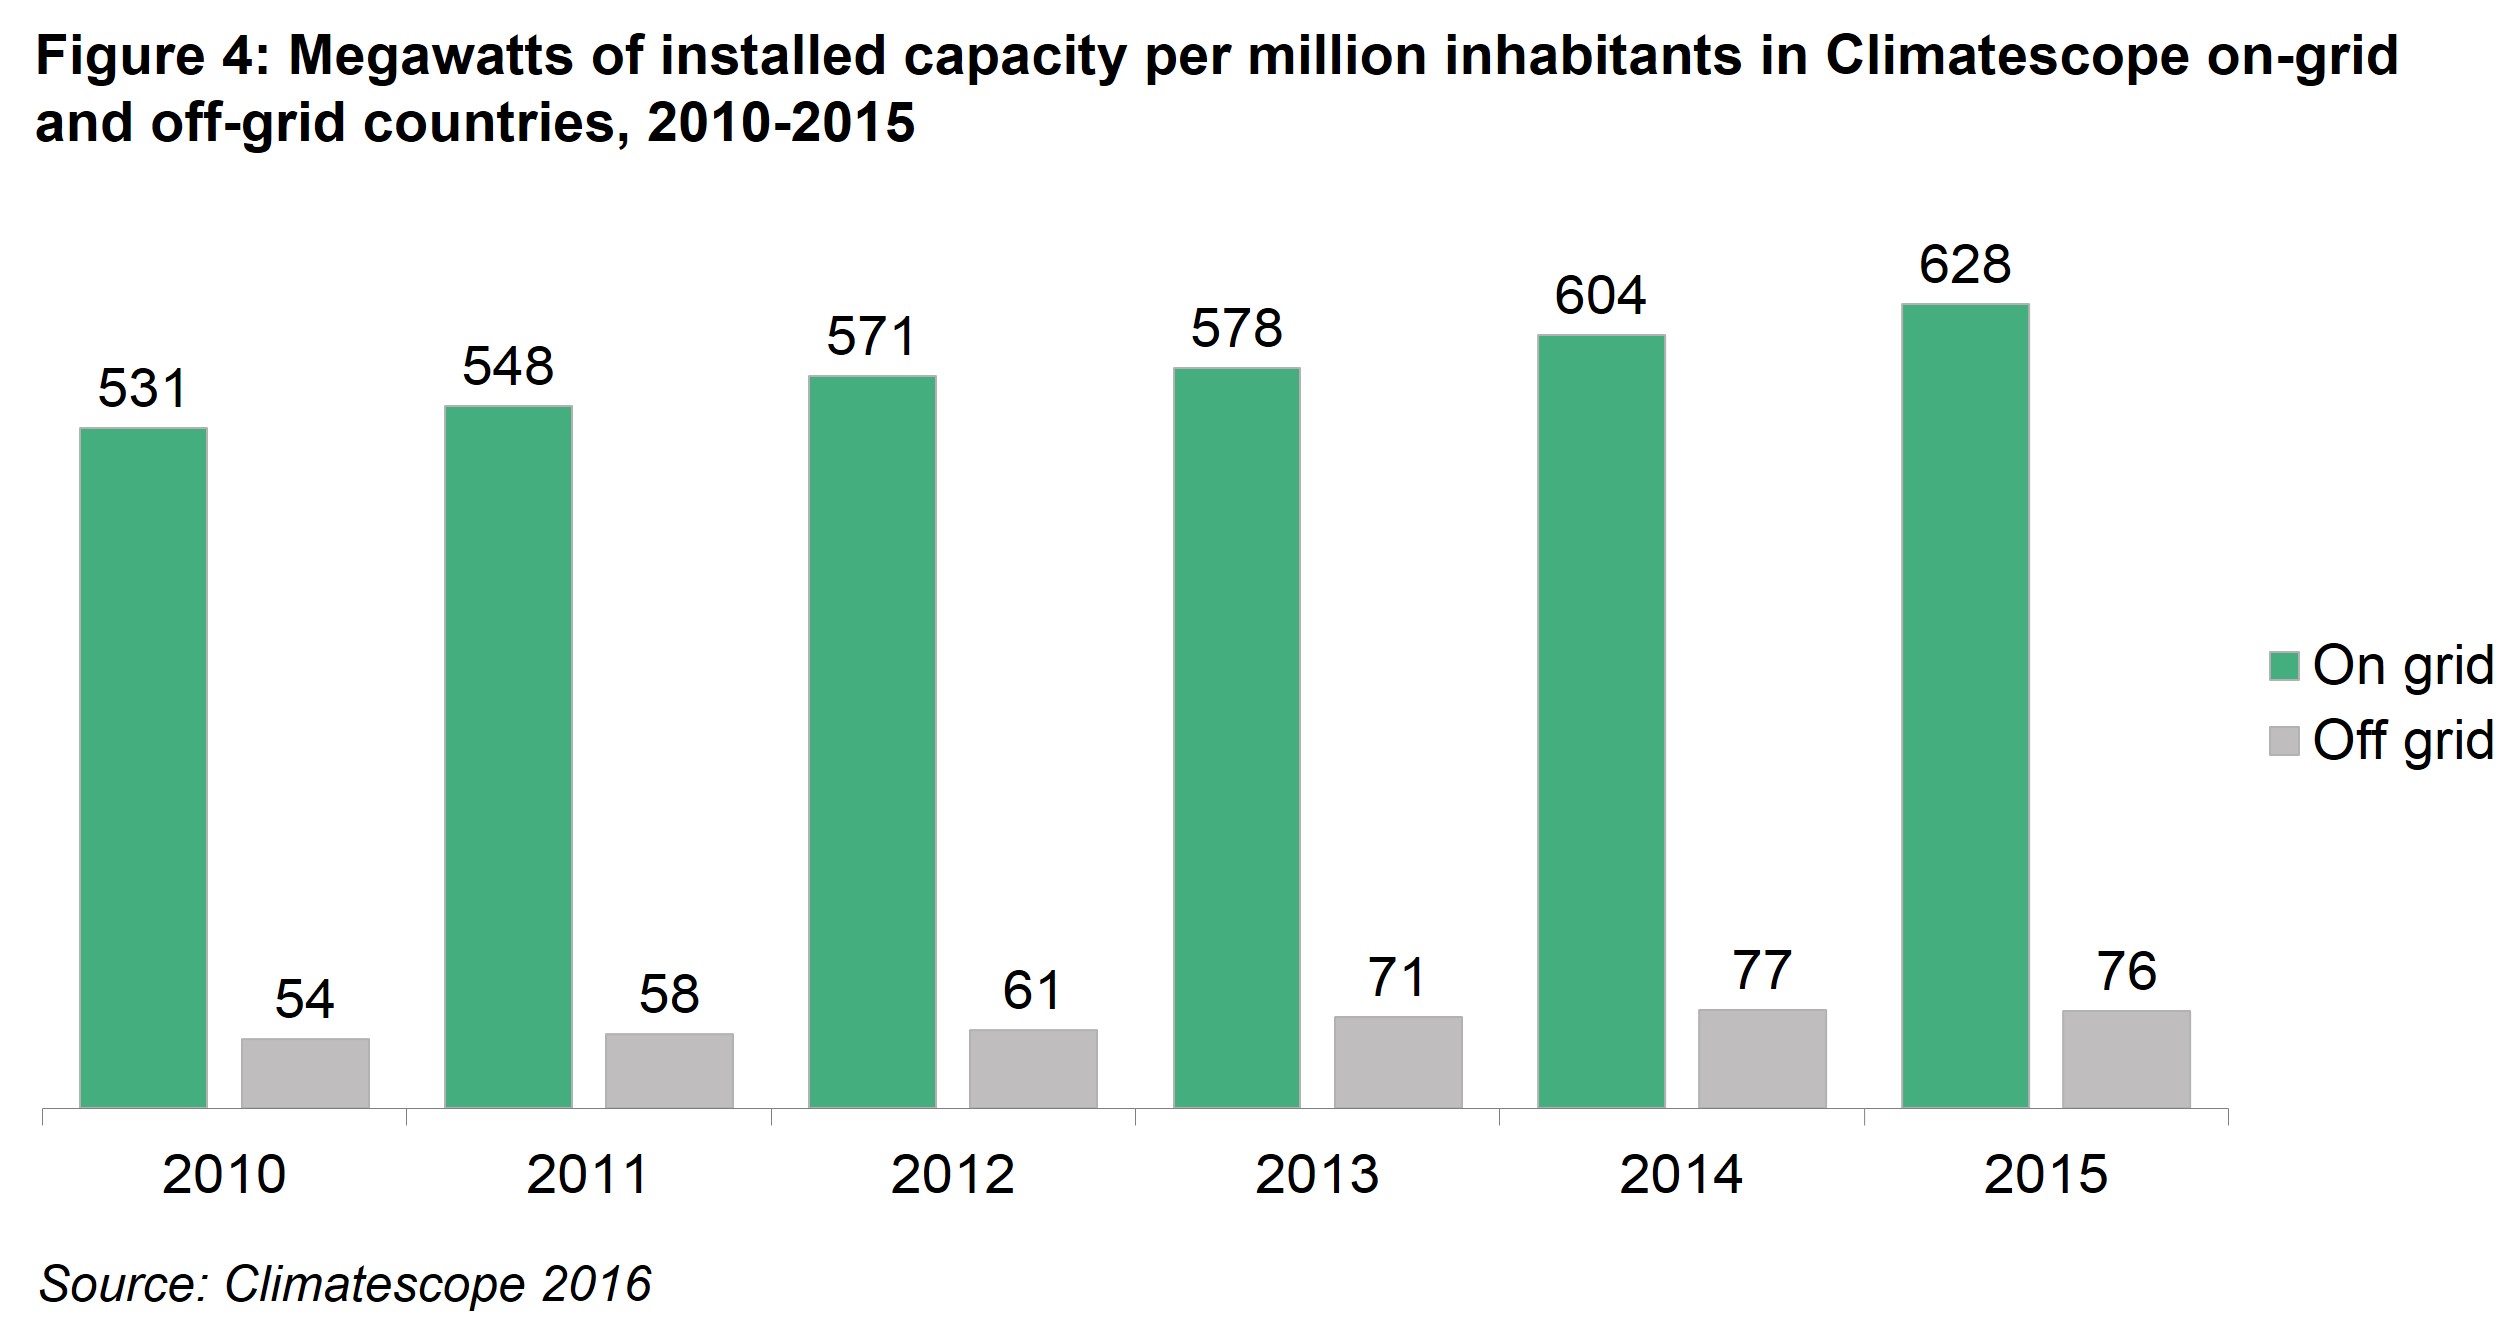 Executive Summary Fig 4 - Megawatts of installed capacity per million inhabitants in Climatescope on-grid and off-grid countries, 2010-2015